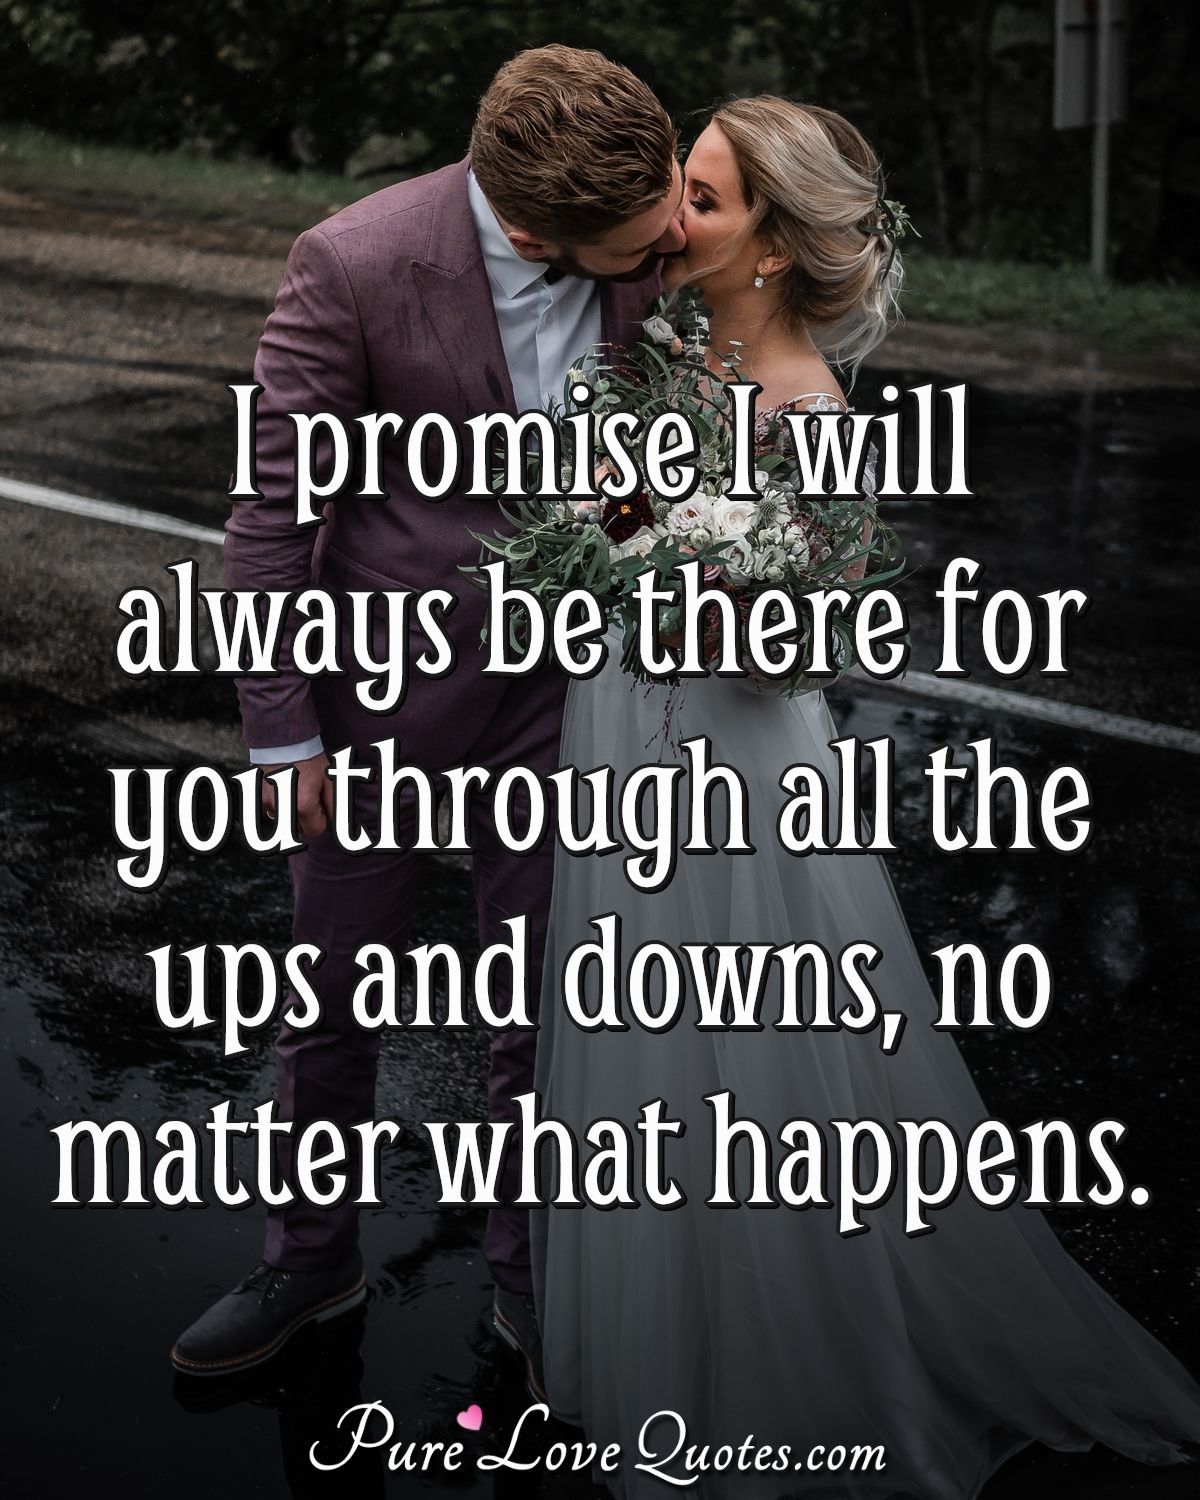 Ultimate Collection: Over 999 Promise Images with Quotes in Stunning 4K ...